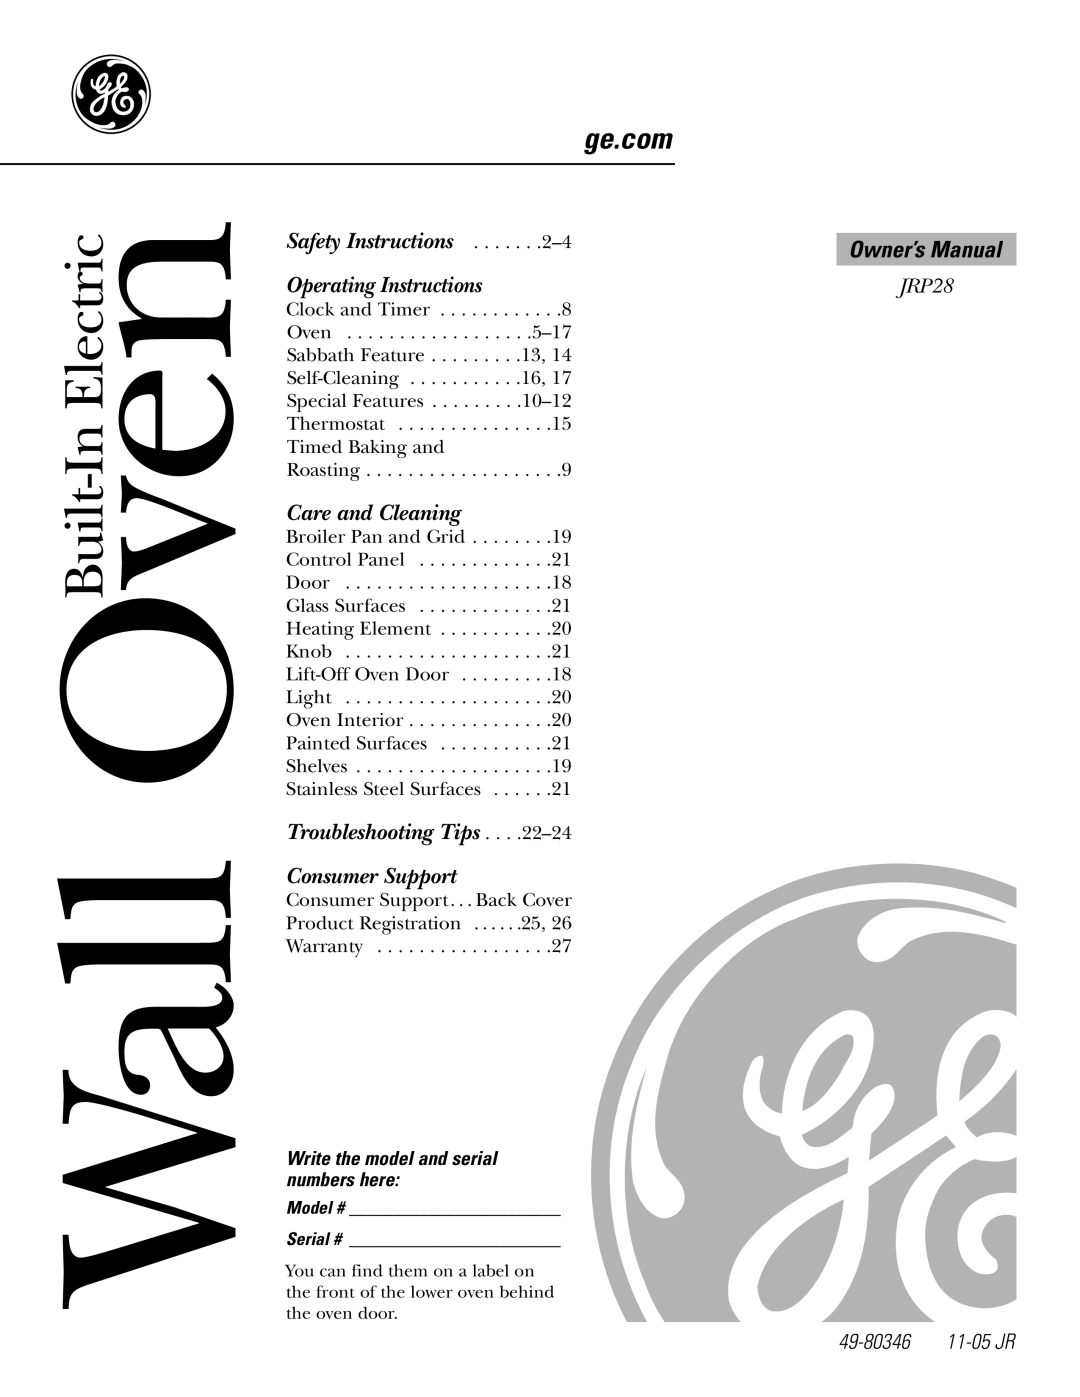 GE JRP28 owner manual Write the model and serial numbers here, Wall OvenBuilt-In Electric, ge.com, Care and Cleaning 